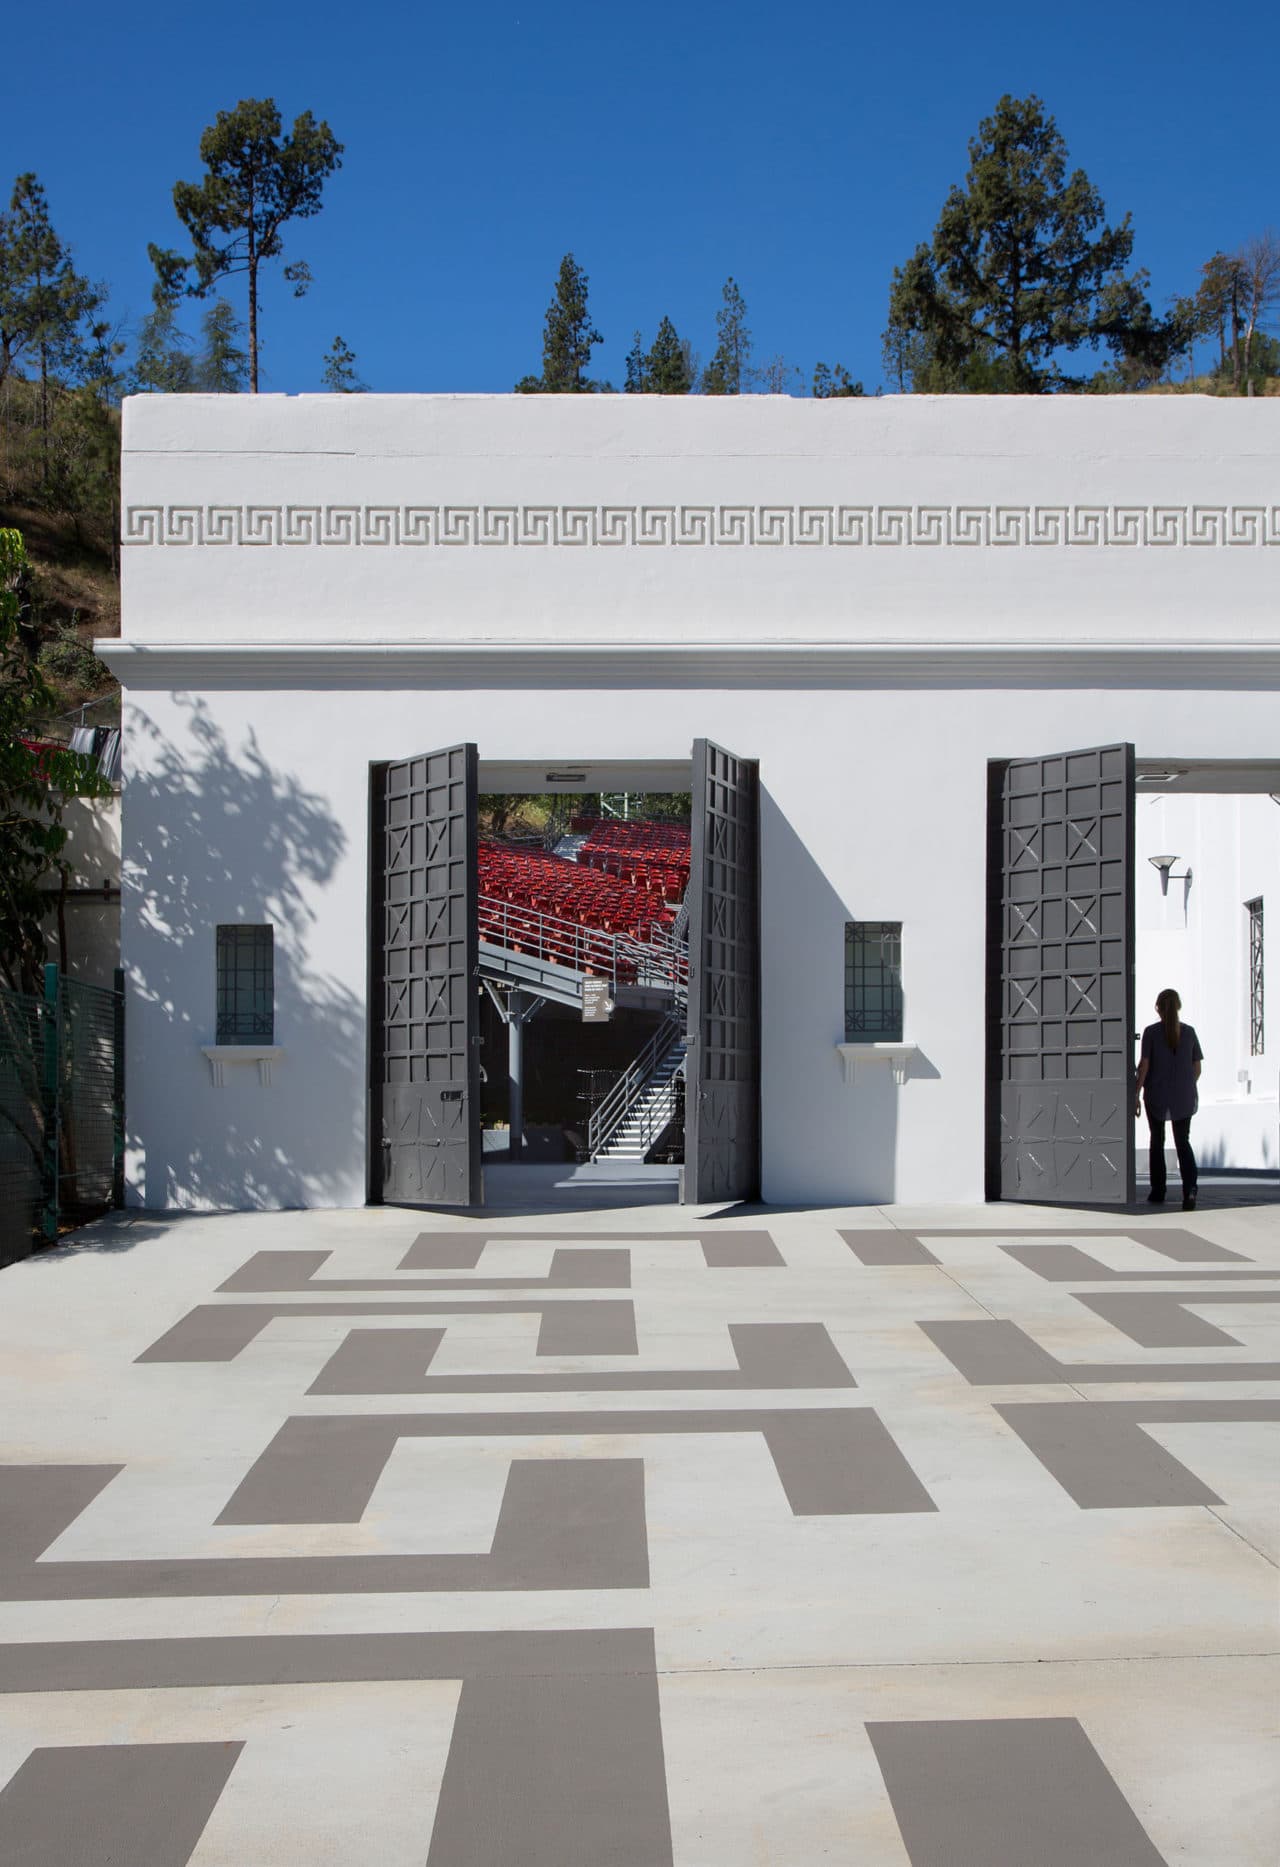 A Landmark Restored: Page & Turnbull Renovates the Greek Theatre in Los Angeles